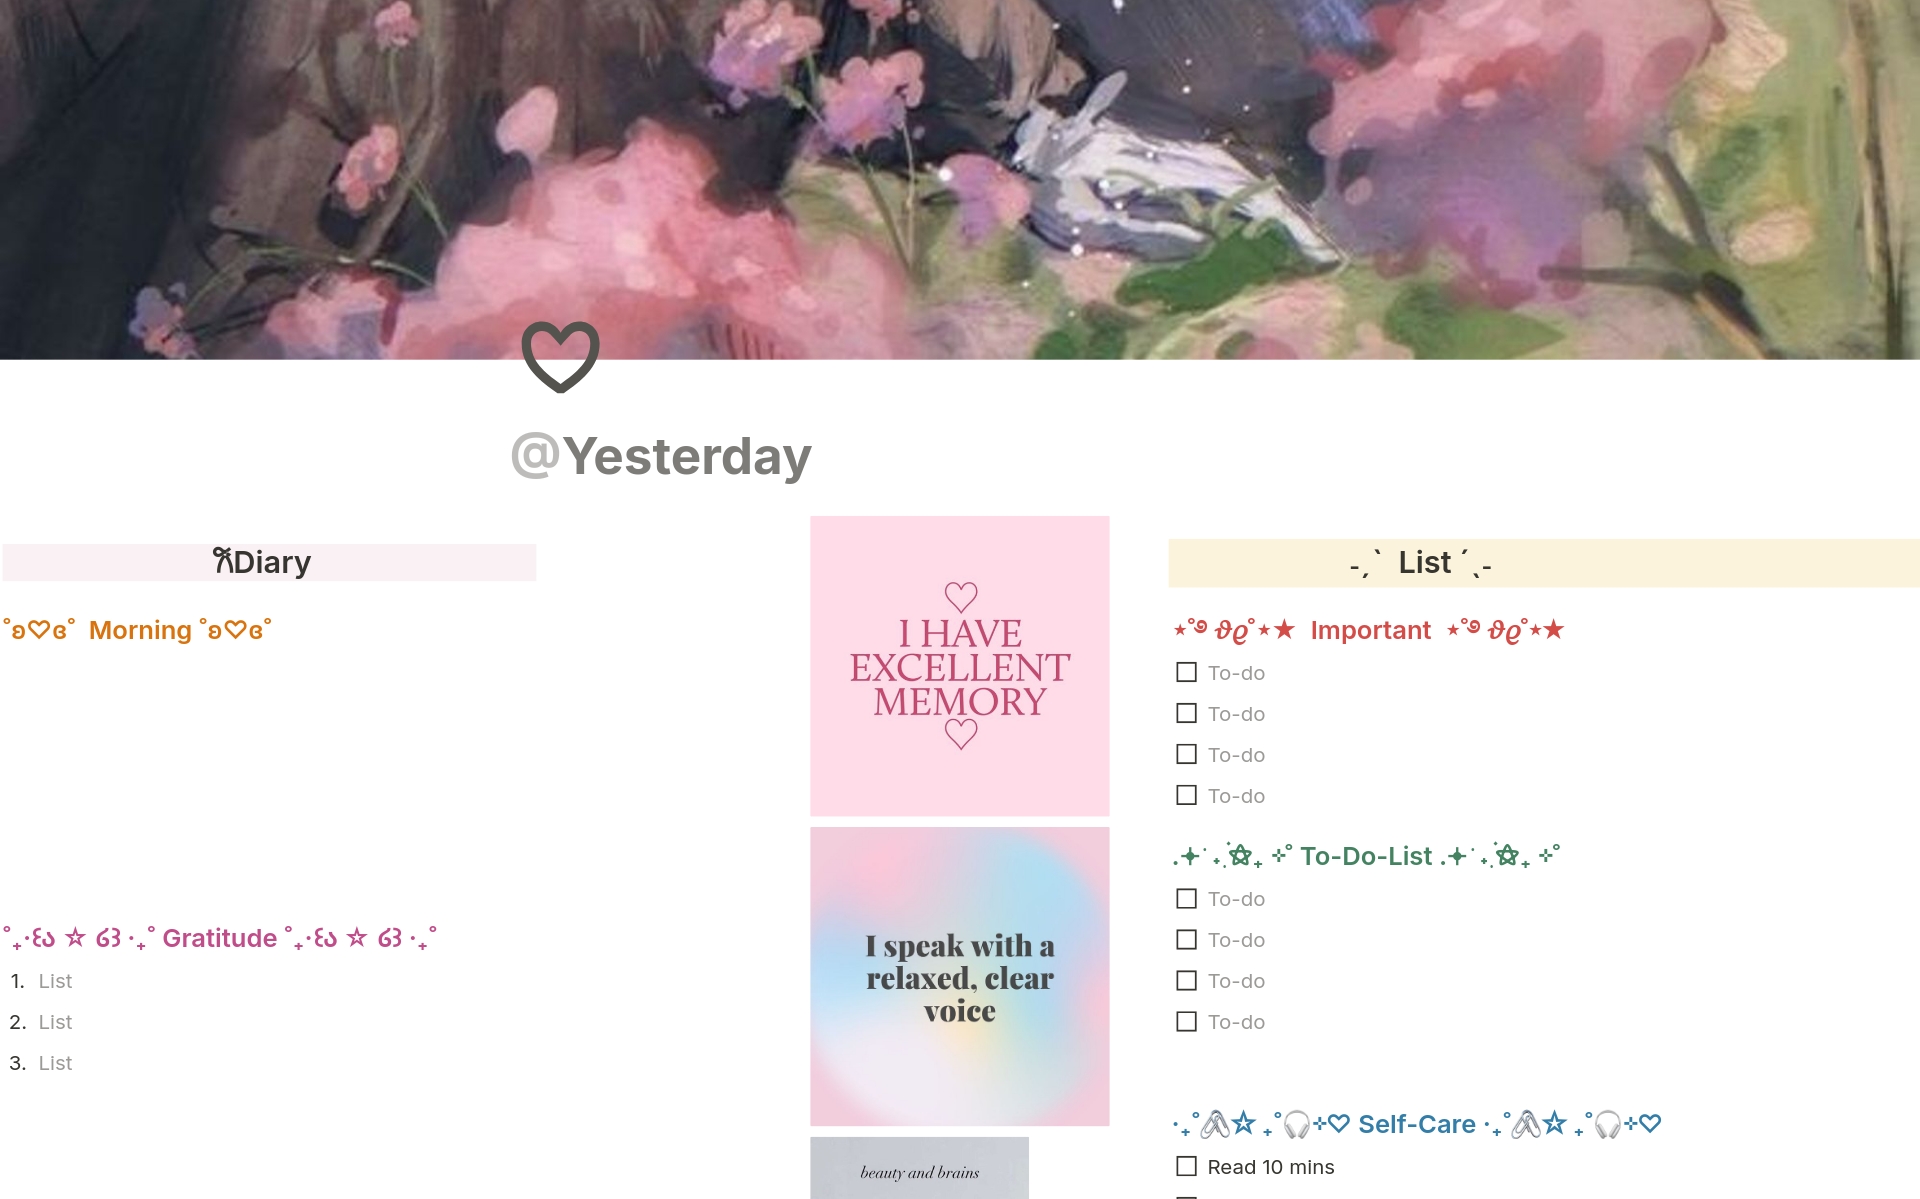 Template consists of : 
- youtube videos (credits to the original owners : UC64KwGynvj3hA7T0C9gC5cA, UC-ga3onzHSJFAGsIebtVeBg)
- pinterest pictures (credits to the original owners) 
- spotify playlists (self-made playlists, credits to original artists)